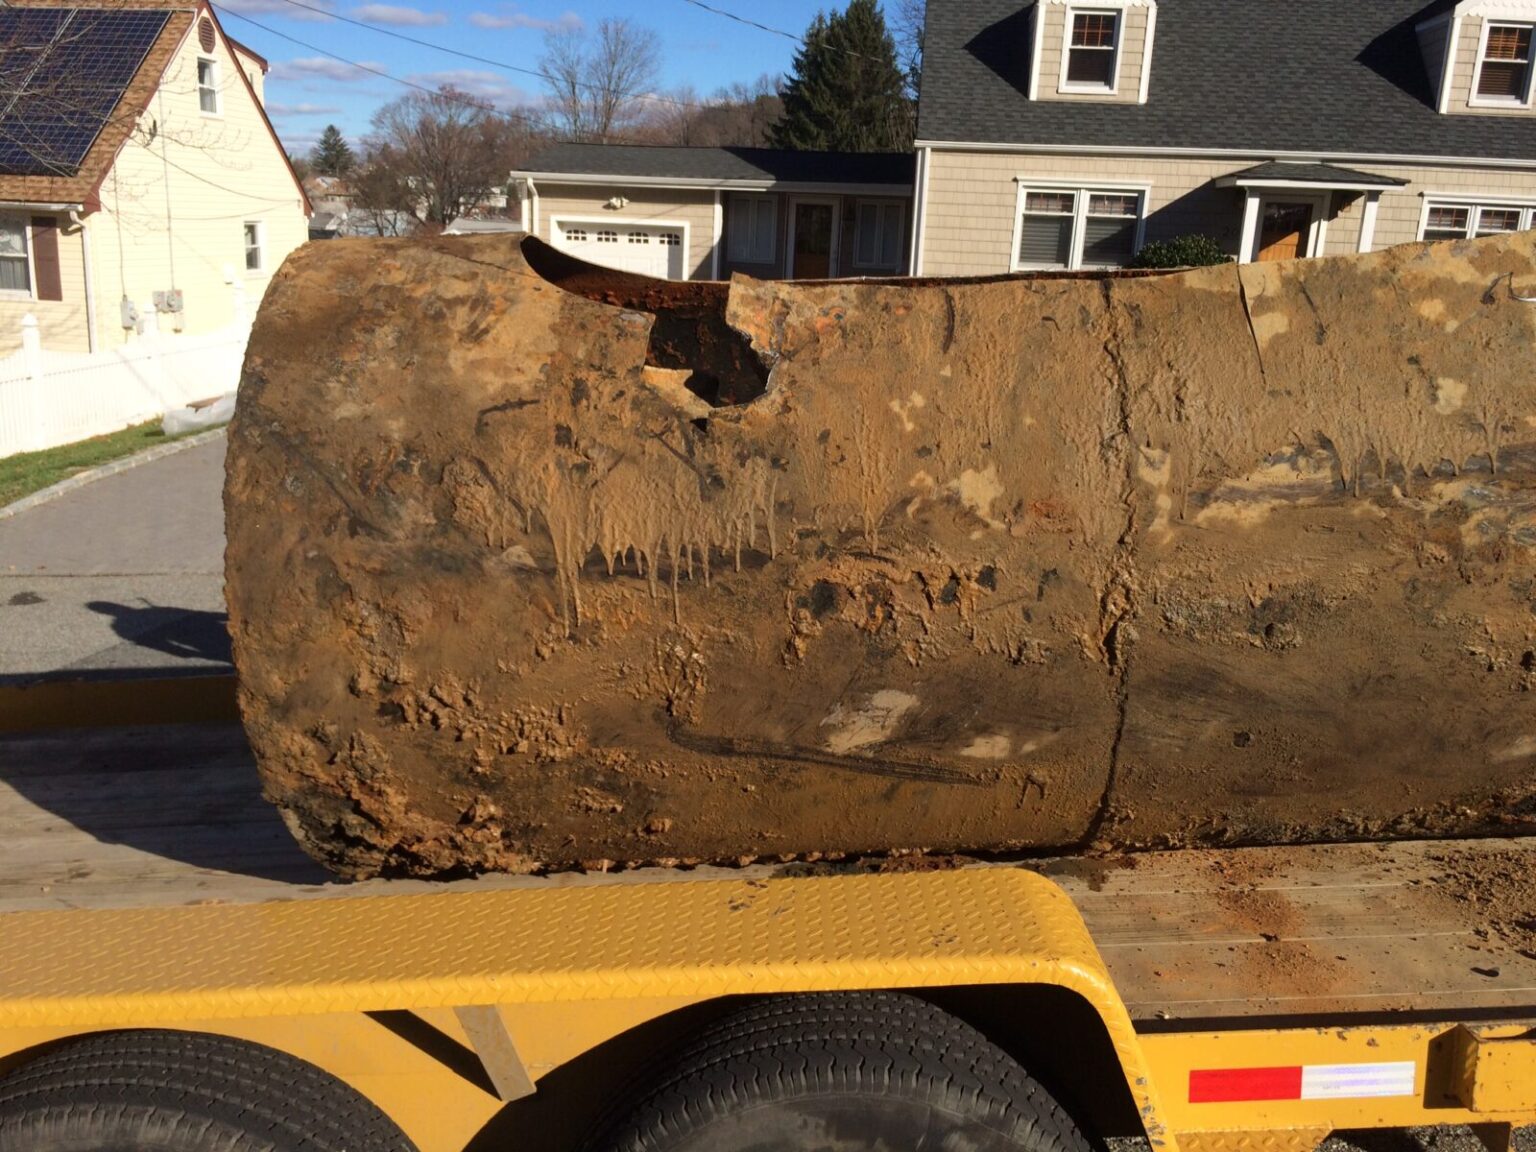 new-jersey-oil-tank-removal-soil-remediation-services